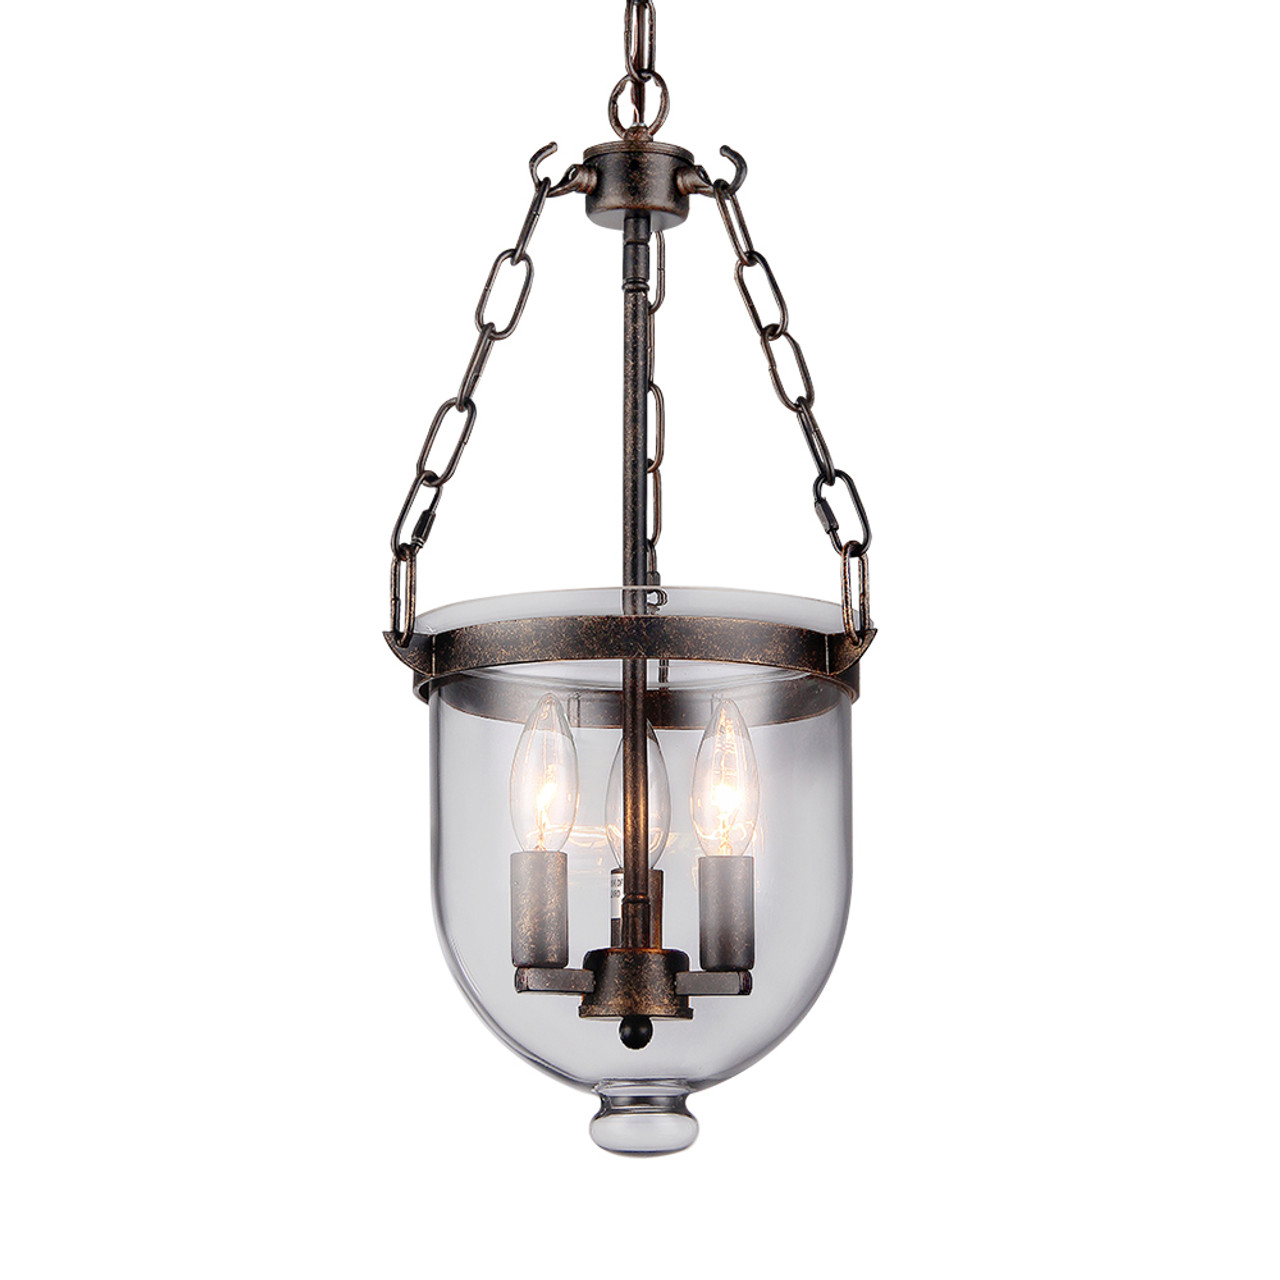 WAREHOUSE OF TIFFANY RL8153BG Hontiveria Black and Gold-tone Metal and Glass Chandelier